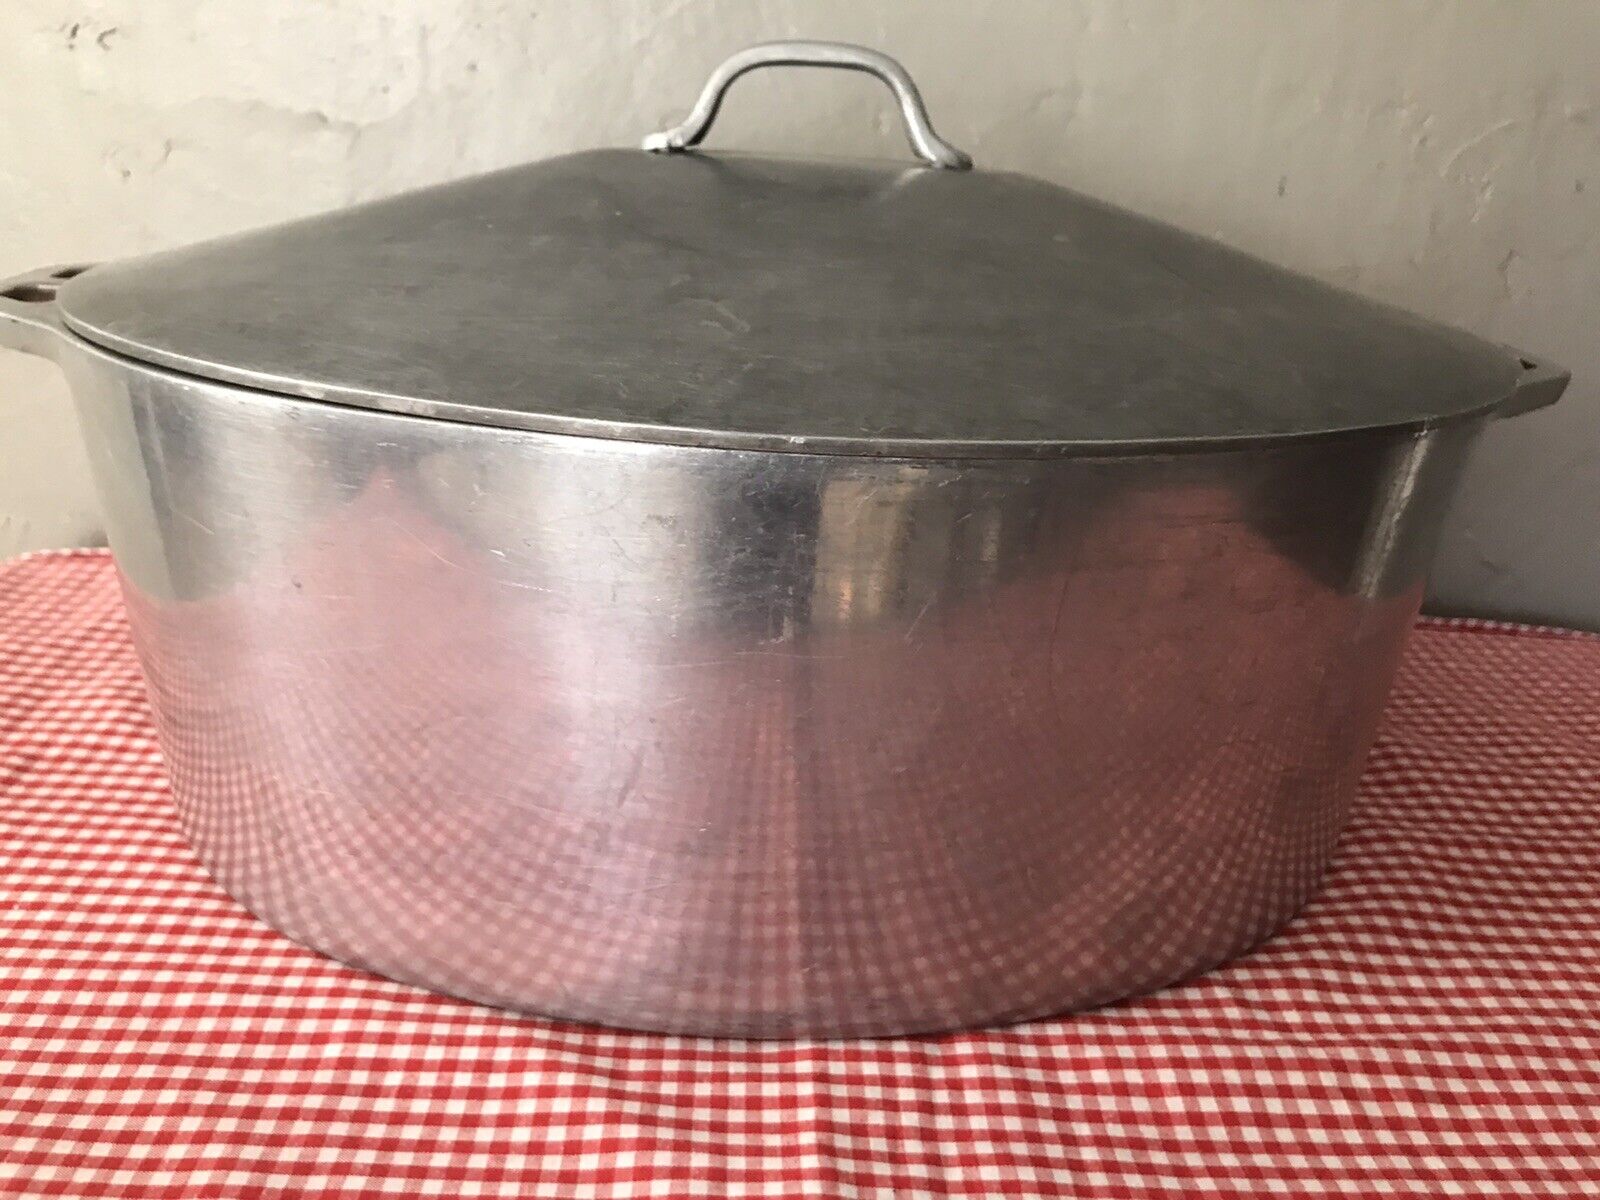 FIRESTONE LARGE VINTAGE  OVAL THICK ALUMINUM ROASTING PAN WITH LID